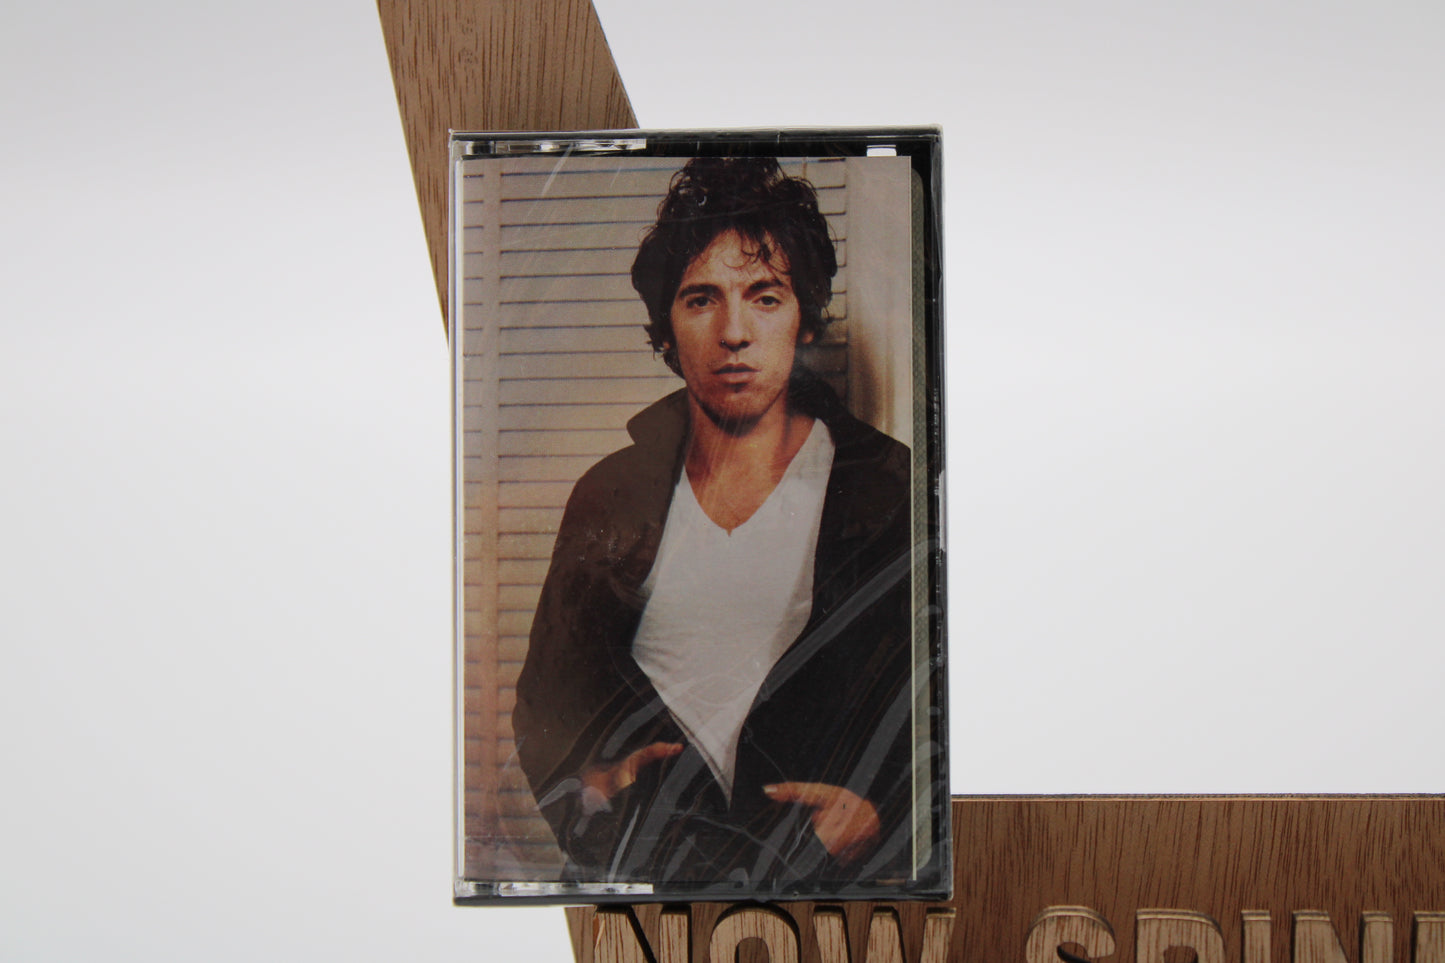 Bruce Springsteen SEALED - Darkness on the Edge of Town album Columbia/CBS Cassette 1978